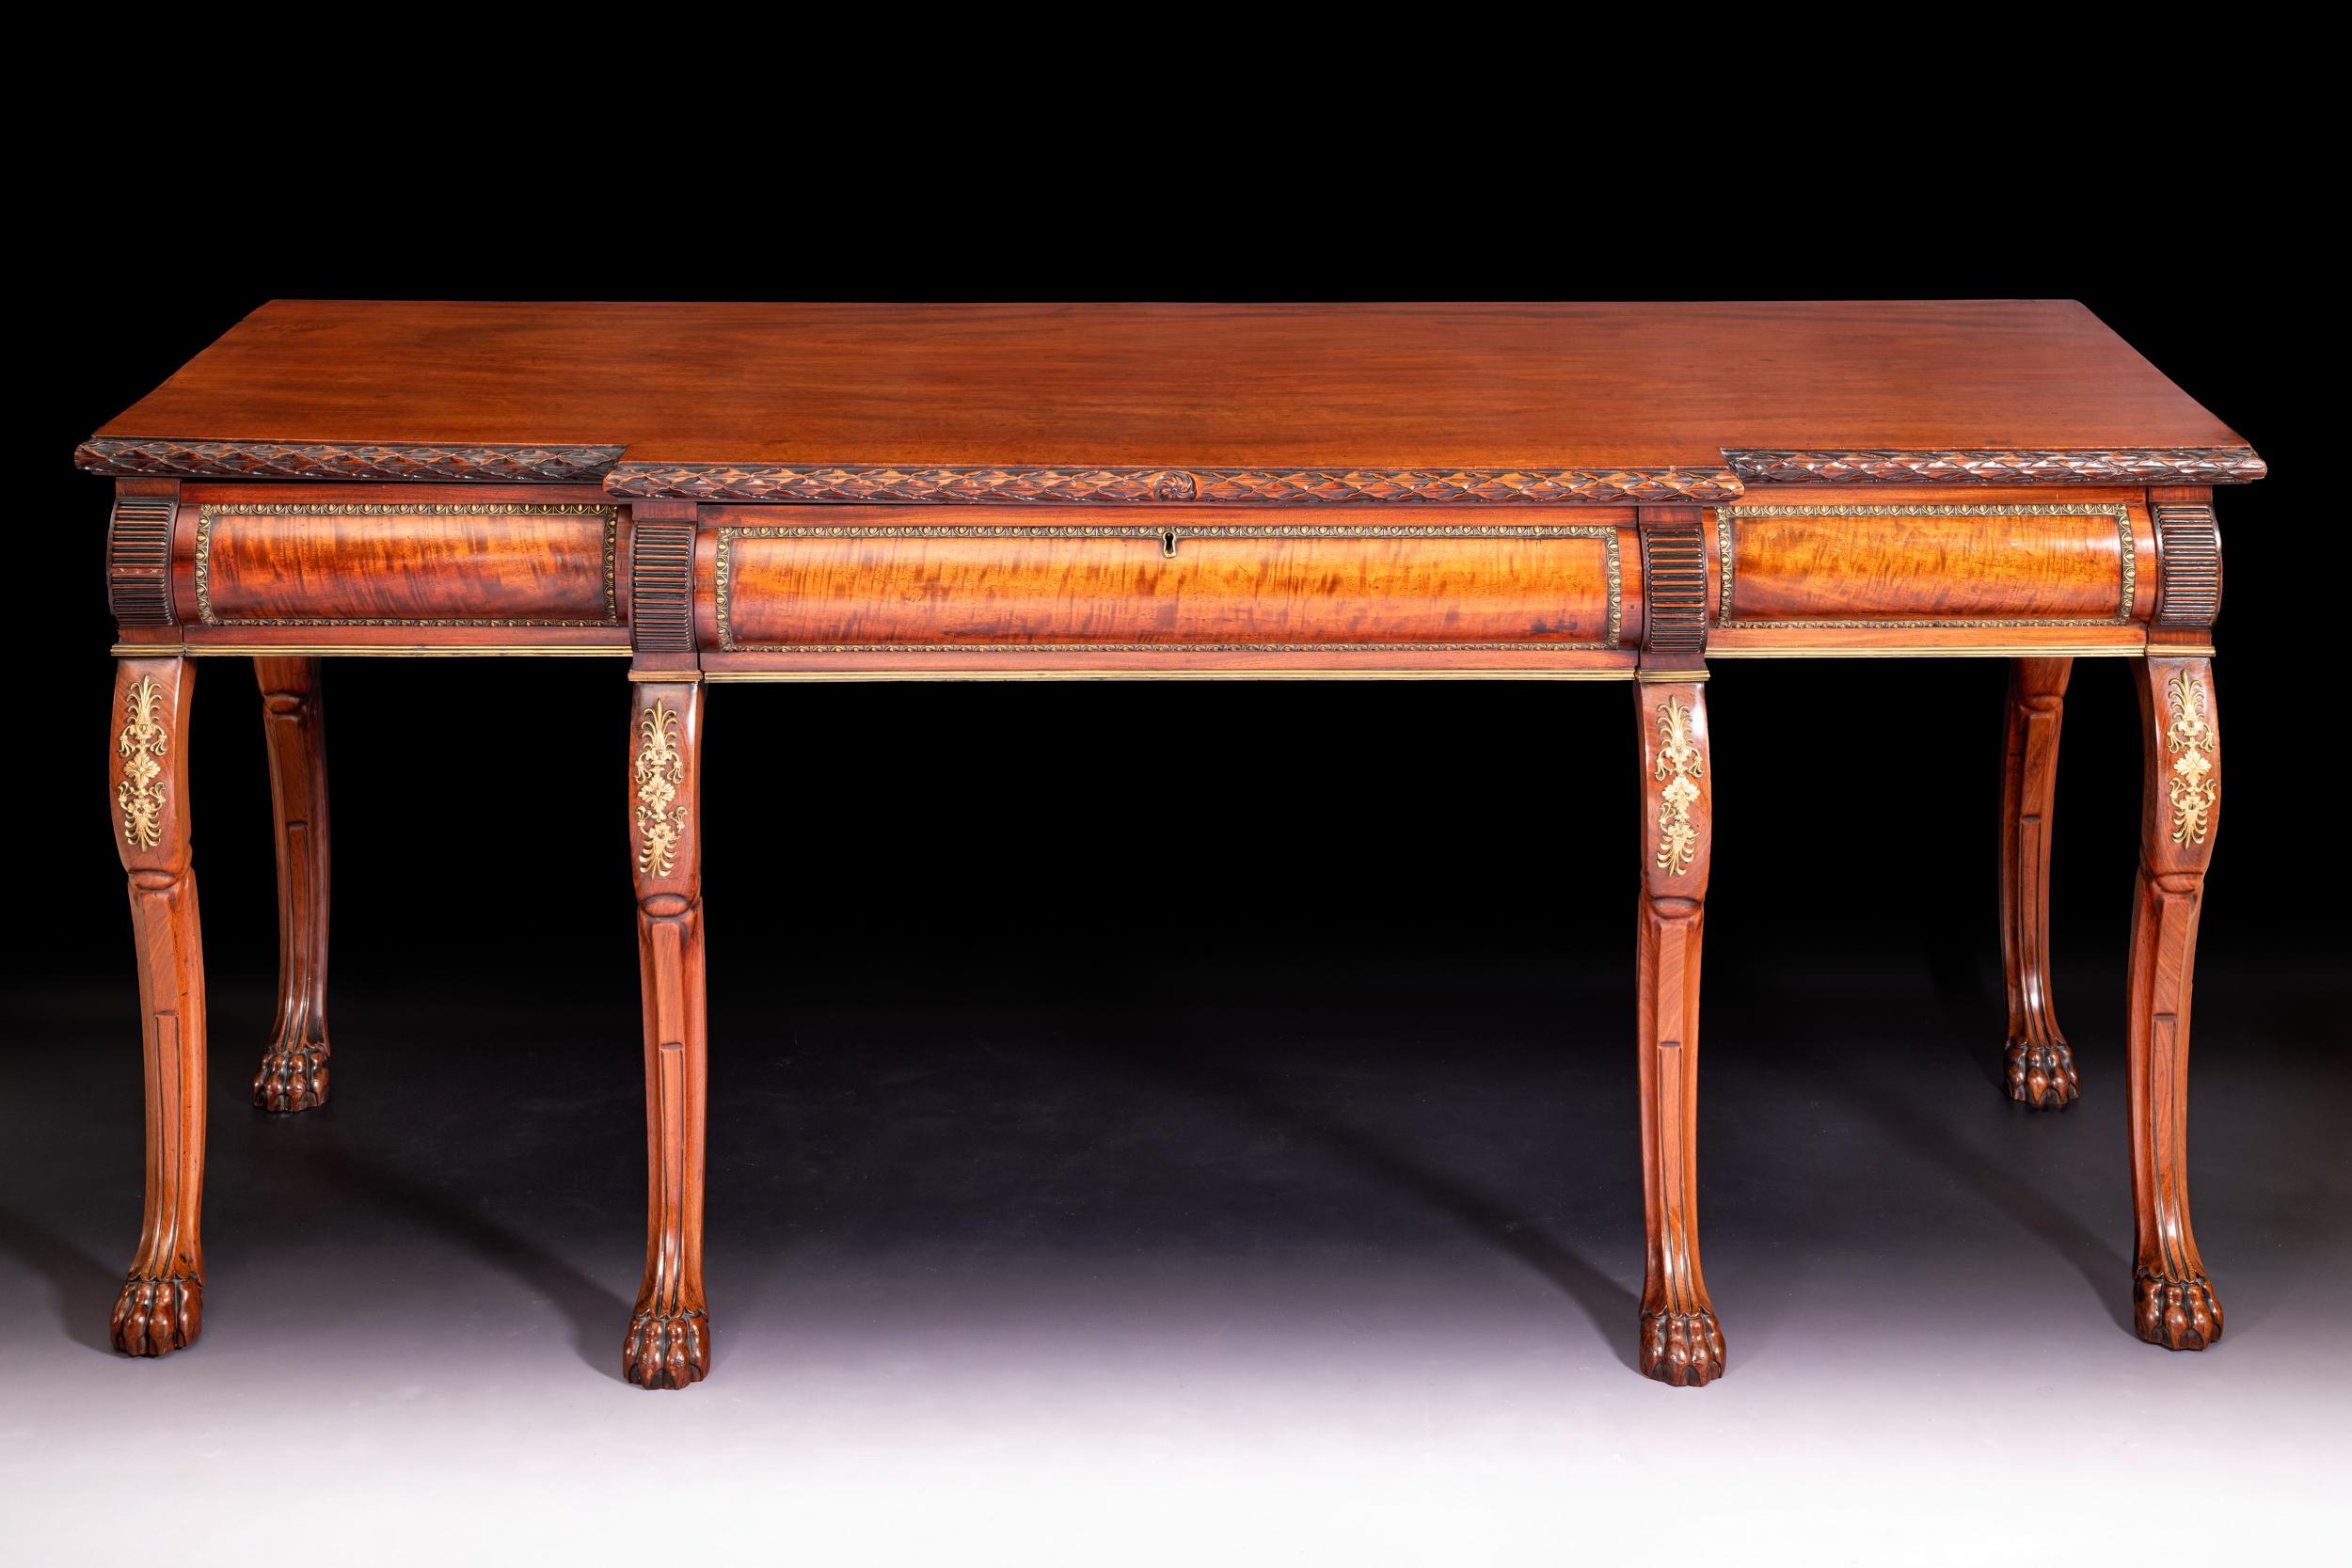 A very fine Regency mahogany console table, the breakfront top with laurel leaf carved rim, above three frieze brass mounted drawers, raised on six elegant cabriole legs, the scroll supports are adorned with fine ormolu mounted decoration,